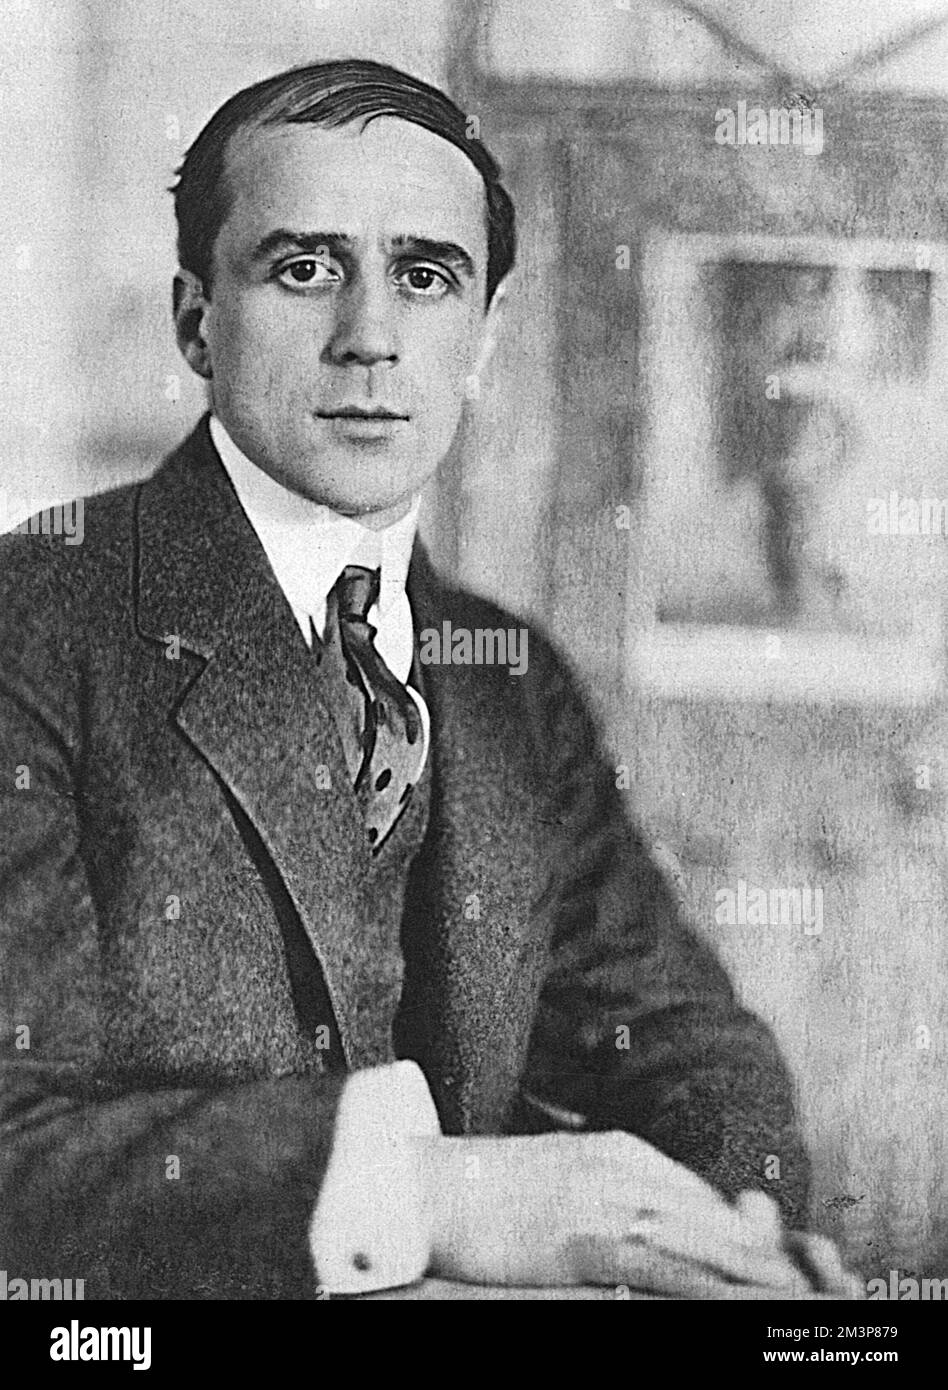 Michel Fokine (Mikhail), (1880 - 1942), Russian choreographer and ballet dancer. He staged more than 70 ballets in Europe and the USA, most famously with the Ballets Russes. Stock Photo